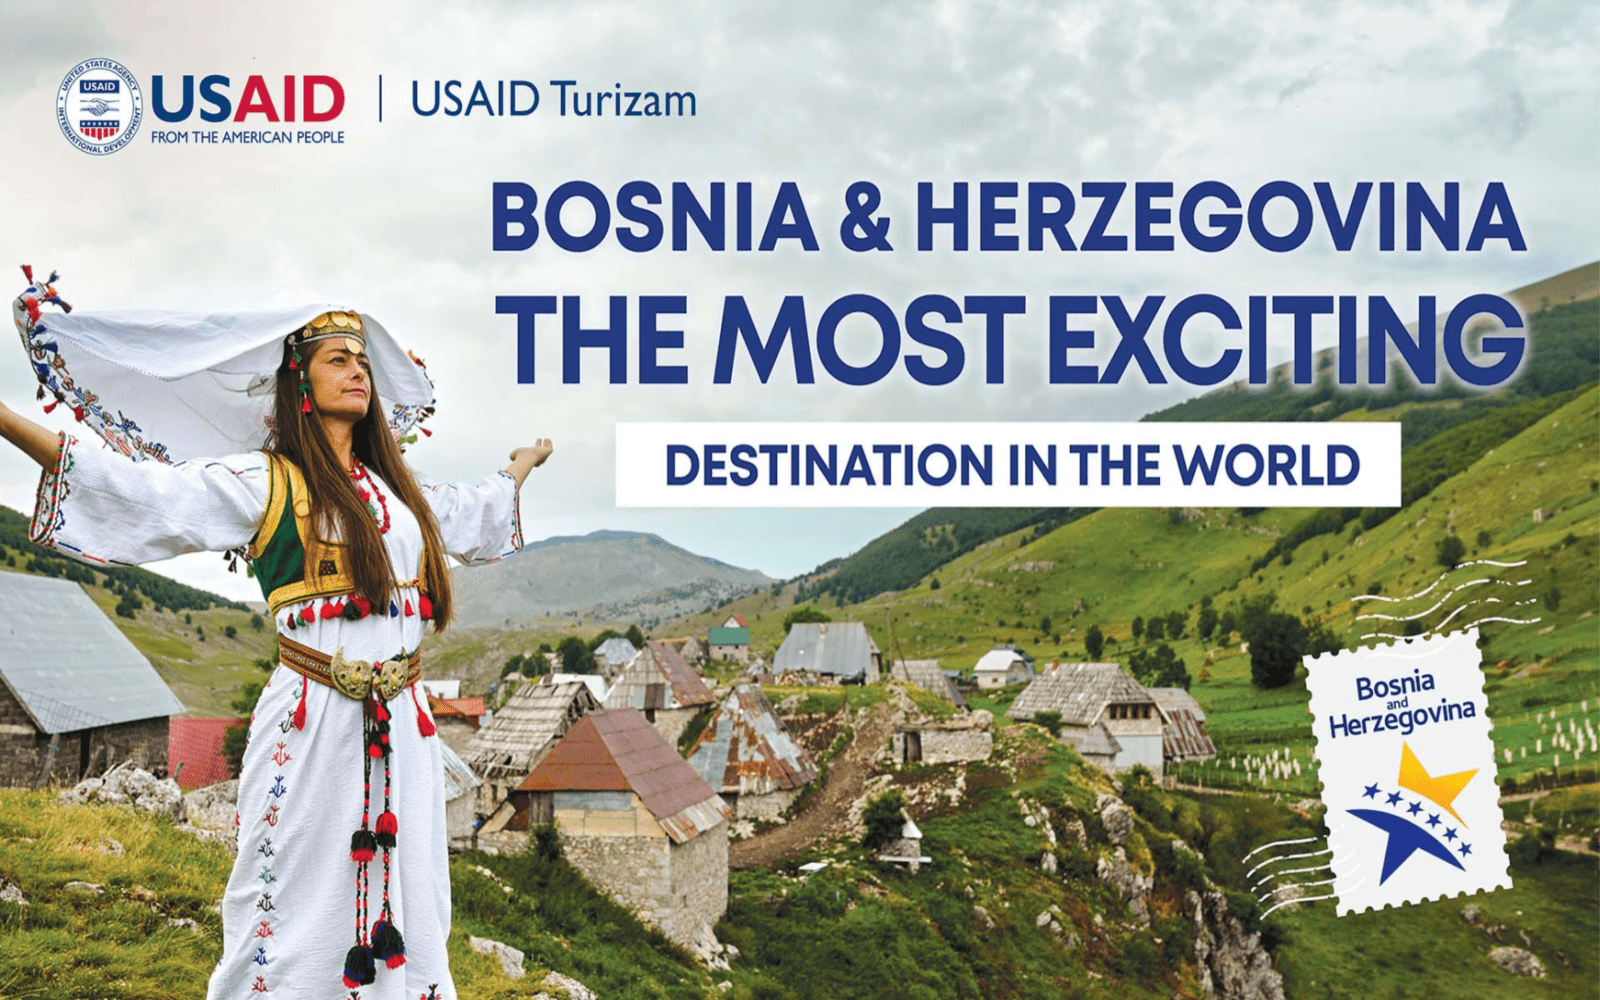 the-most-exciting-destination_bosnia-and-herzegovina